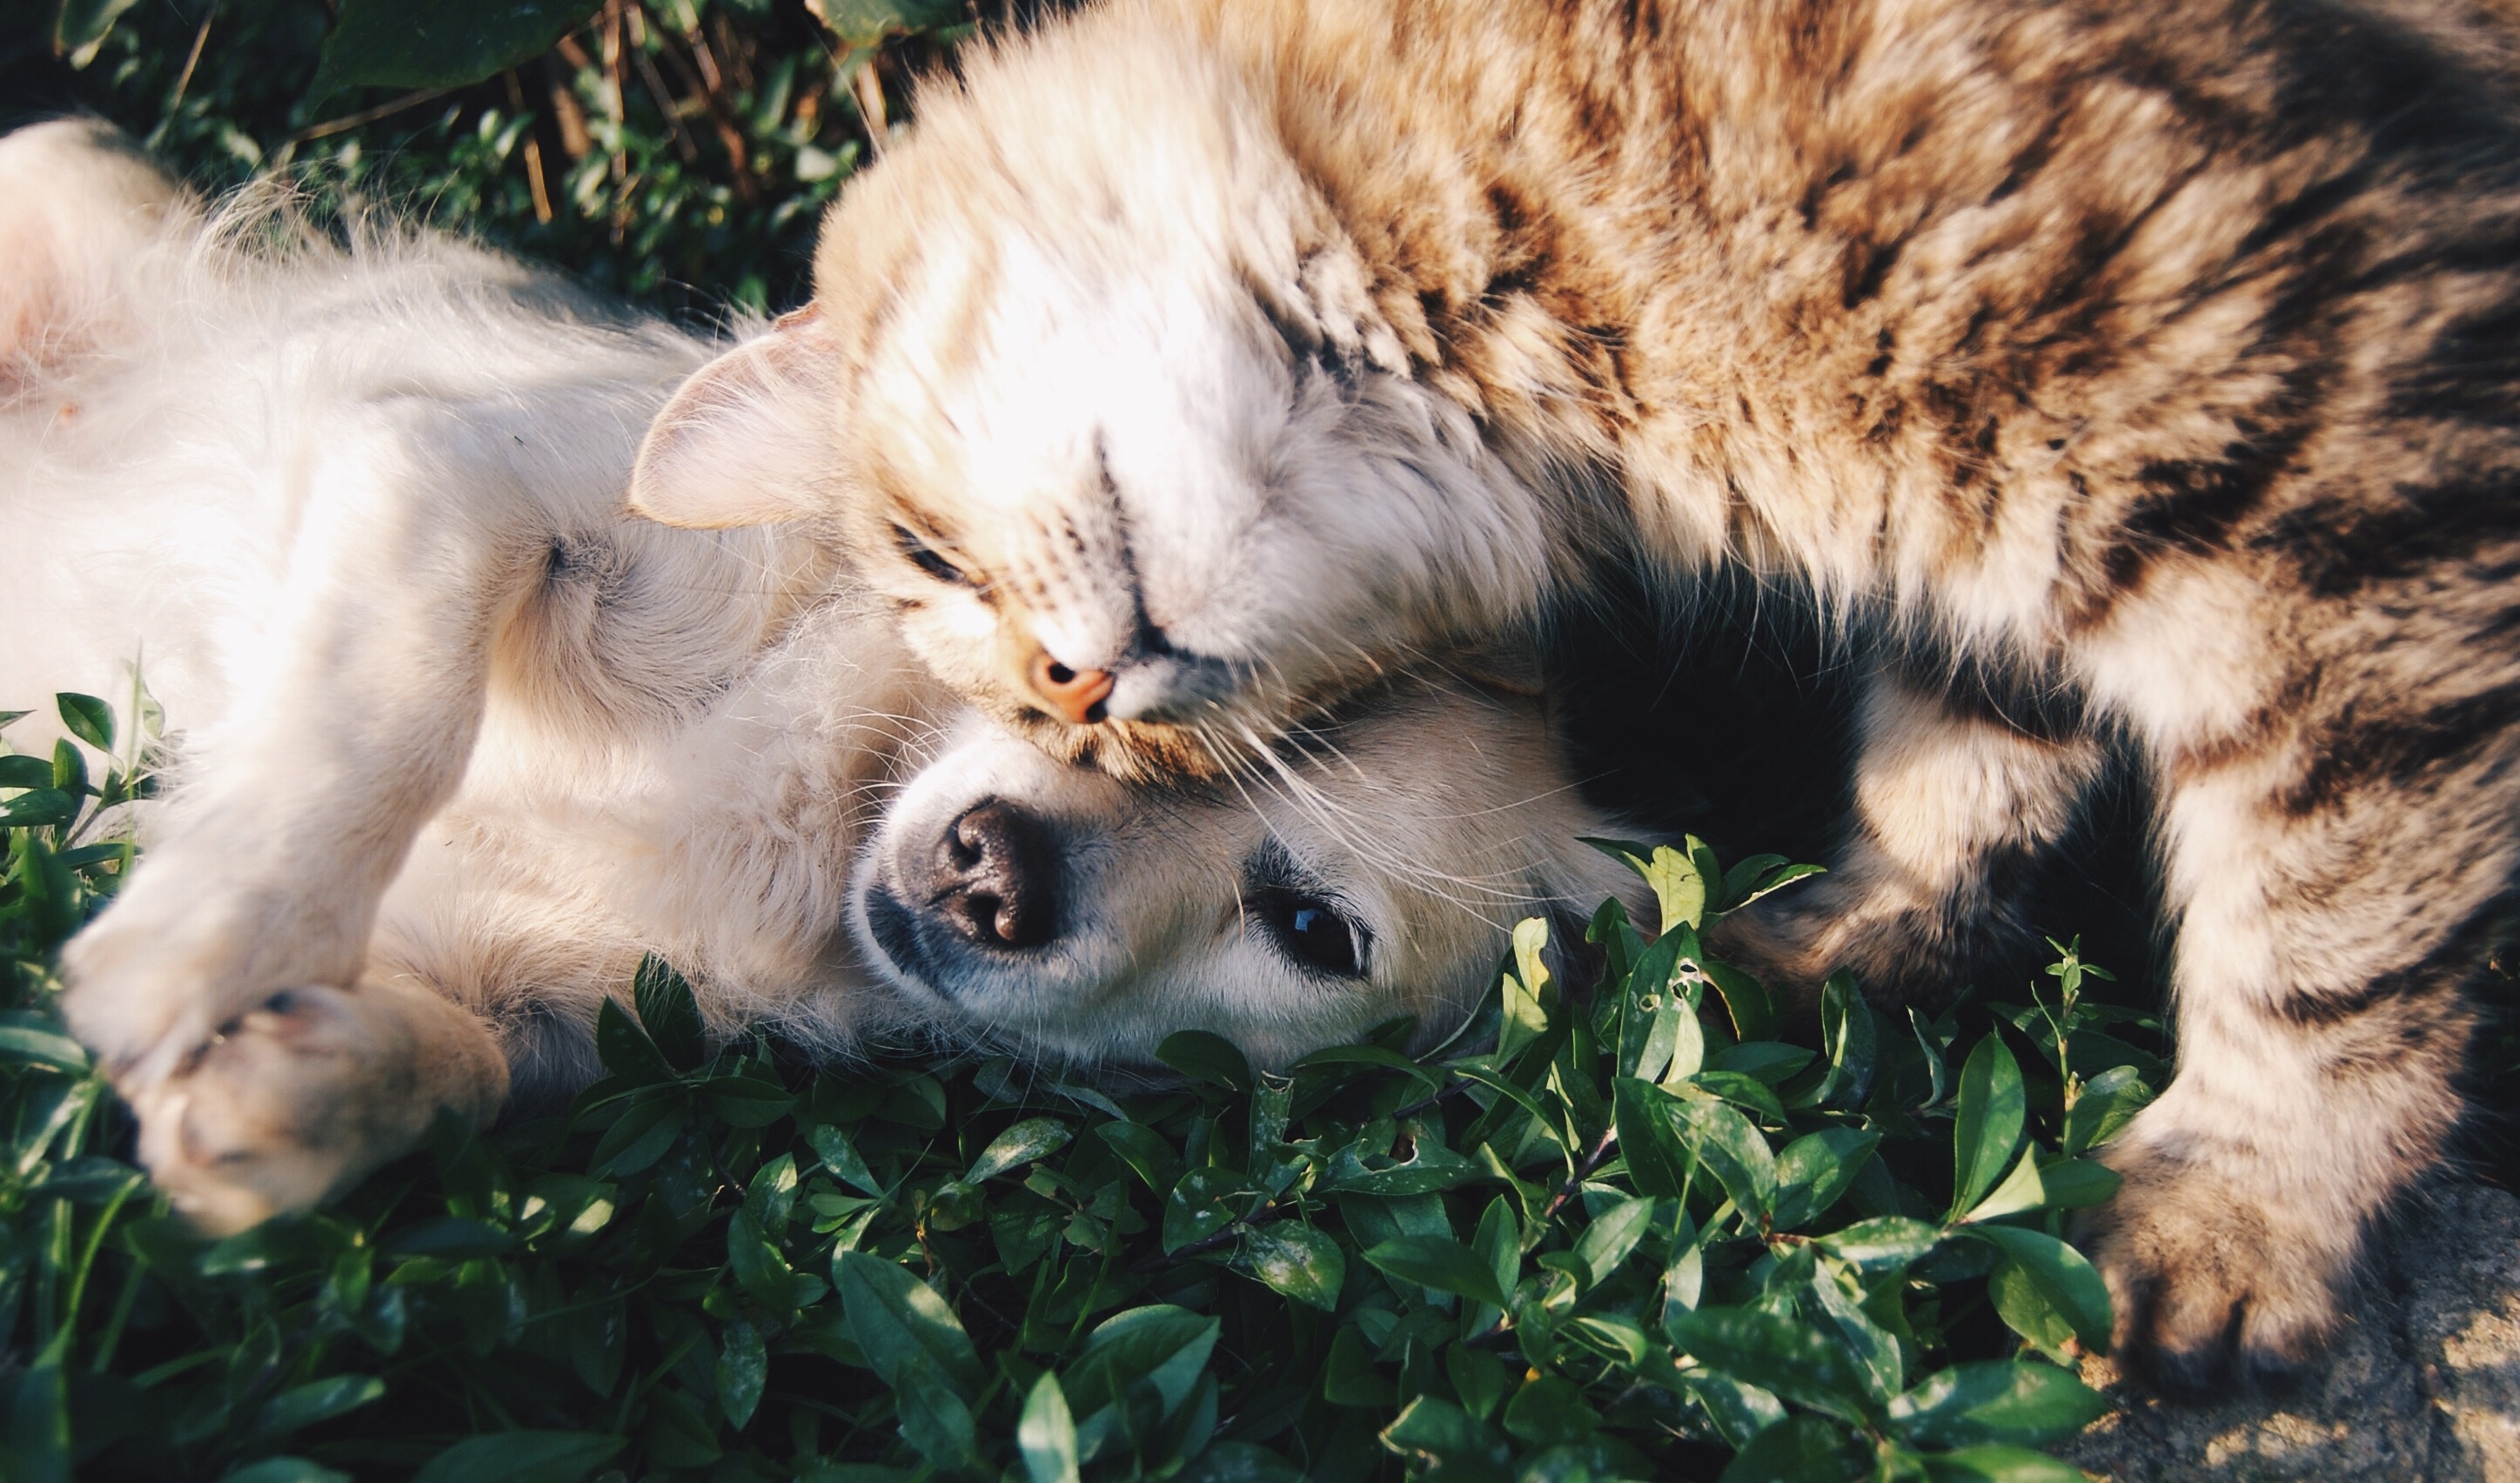 orange-tabby-cat-beside-fawn-short-coated-puppy-46024 pets_1645421971.jpeg Snapwire at Pexels